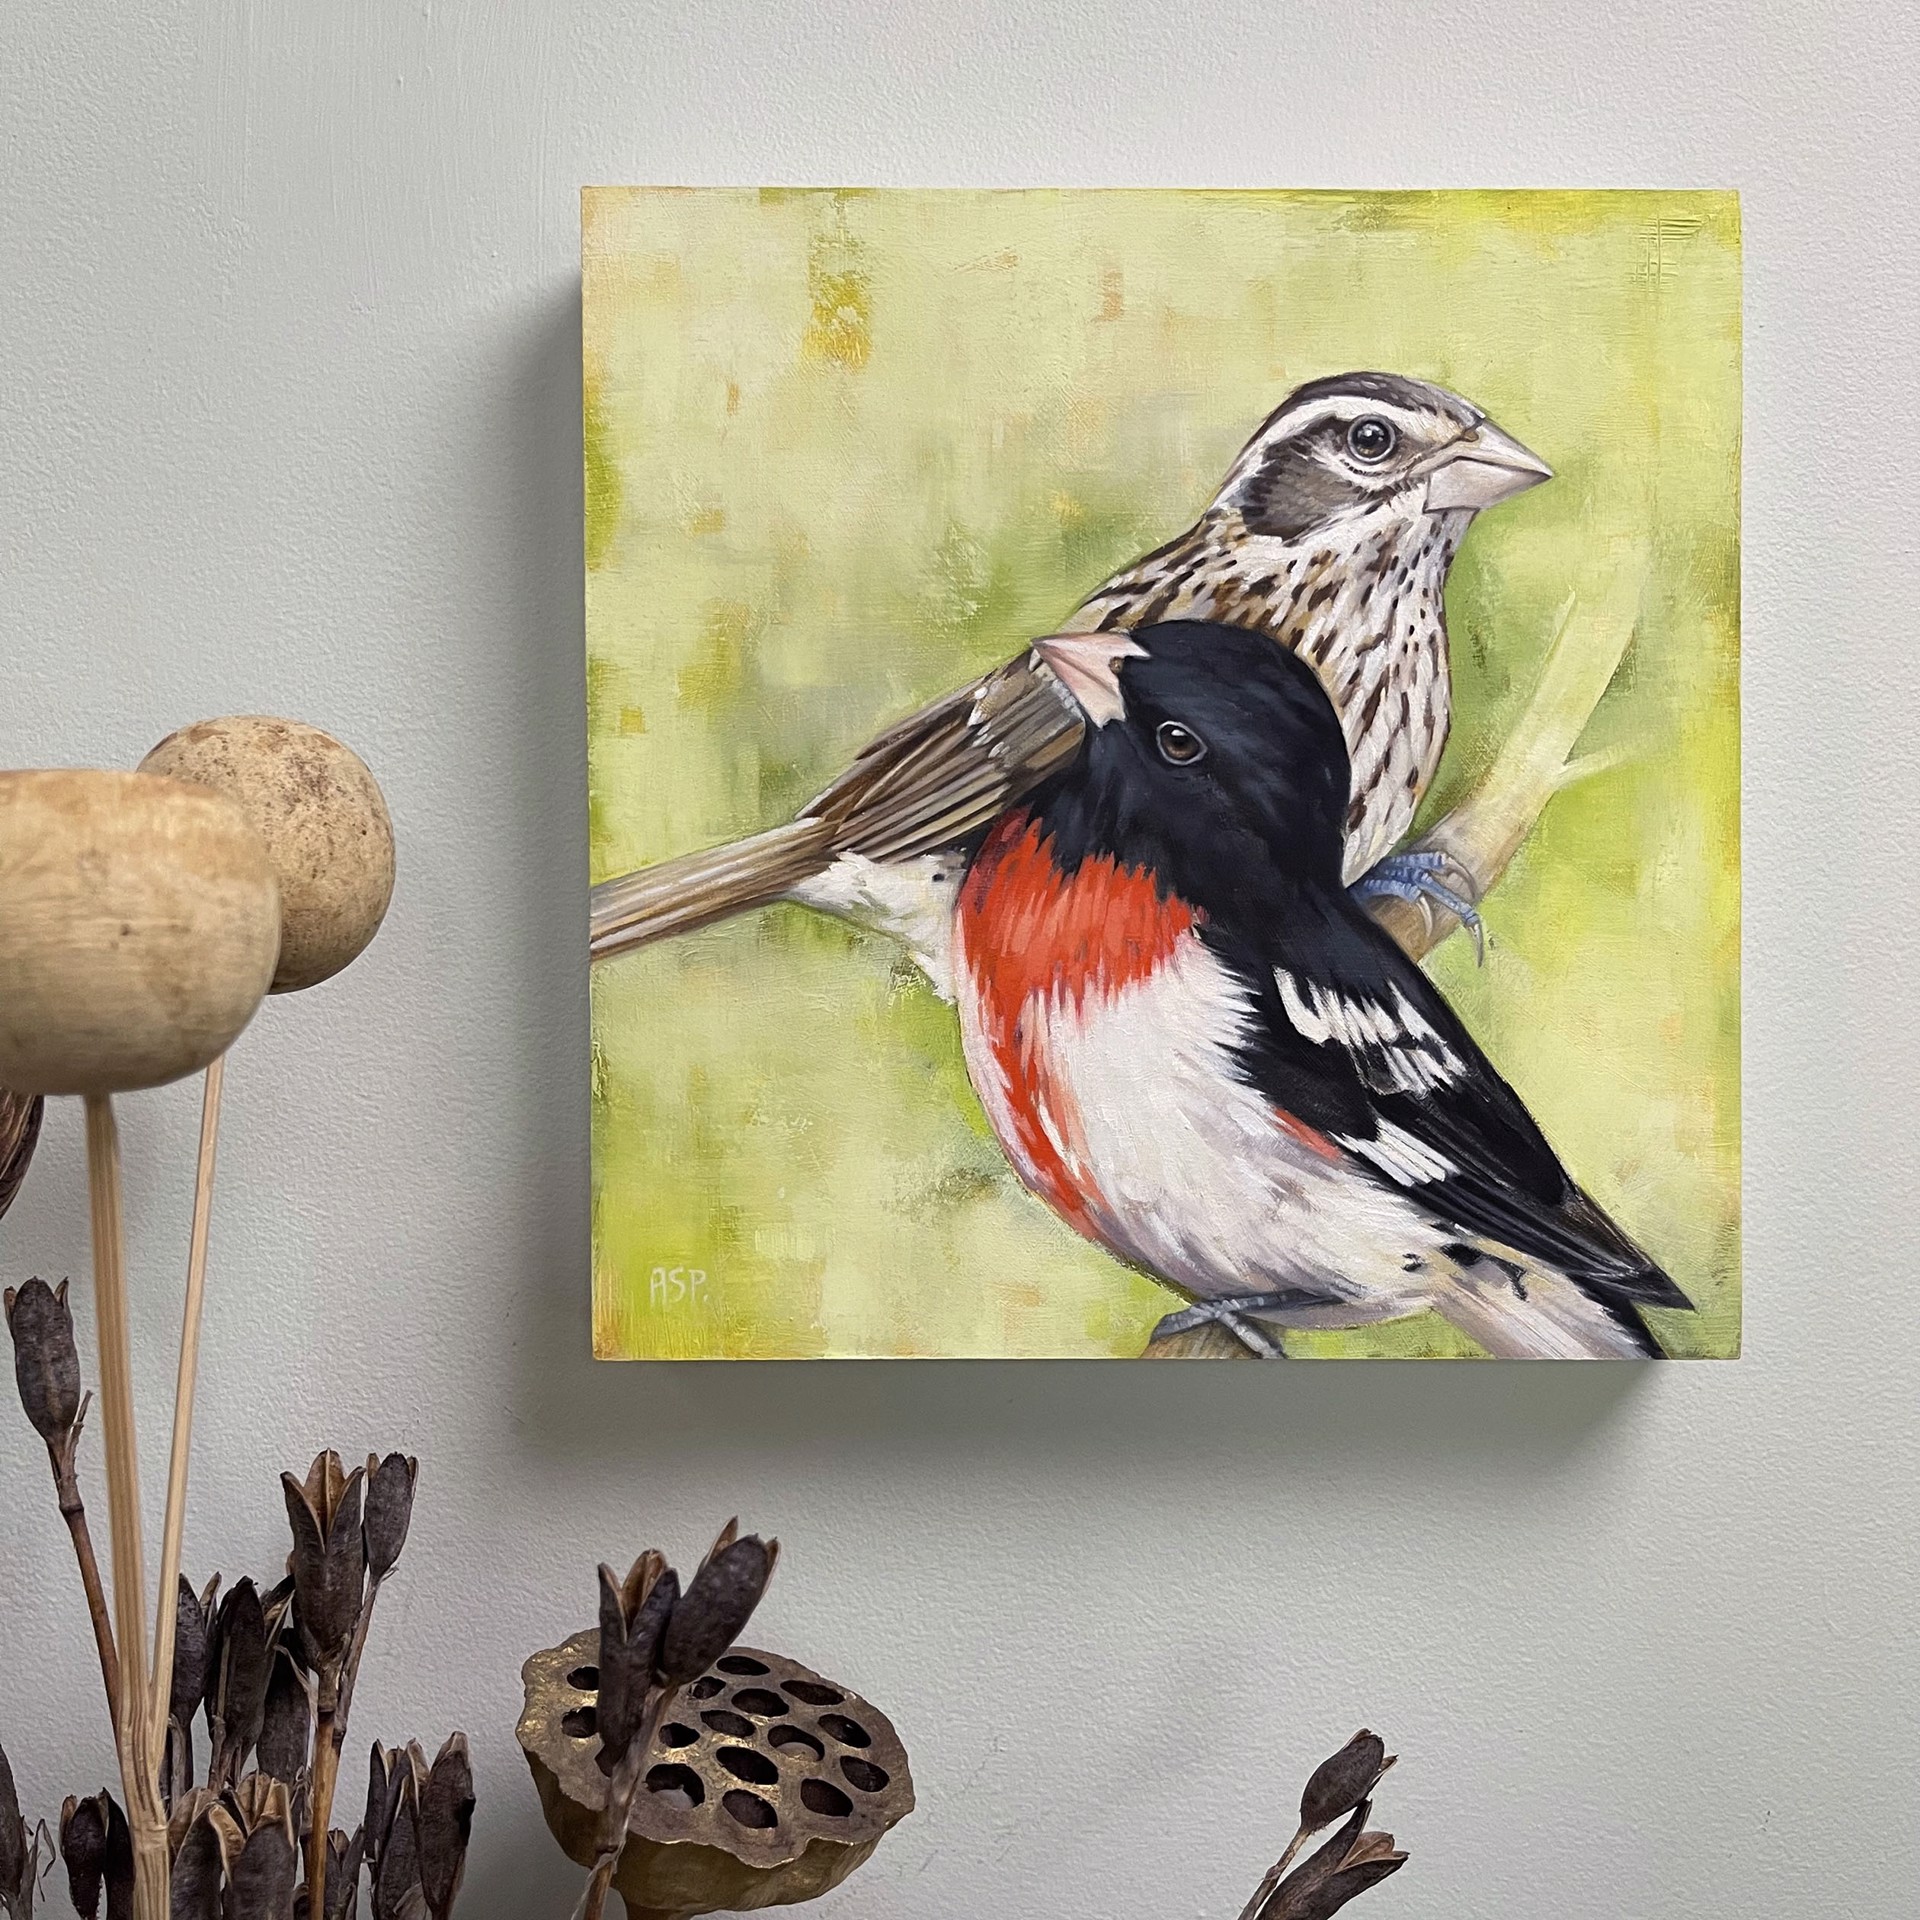 We Met at the Edge (Rose Breasted Grosbeak) by Amy Shawley